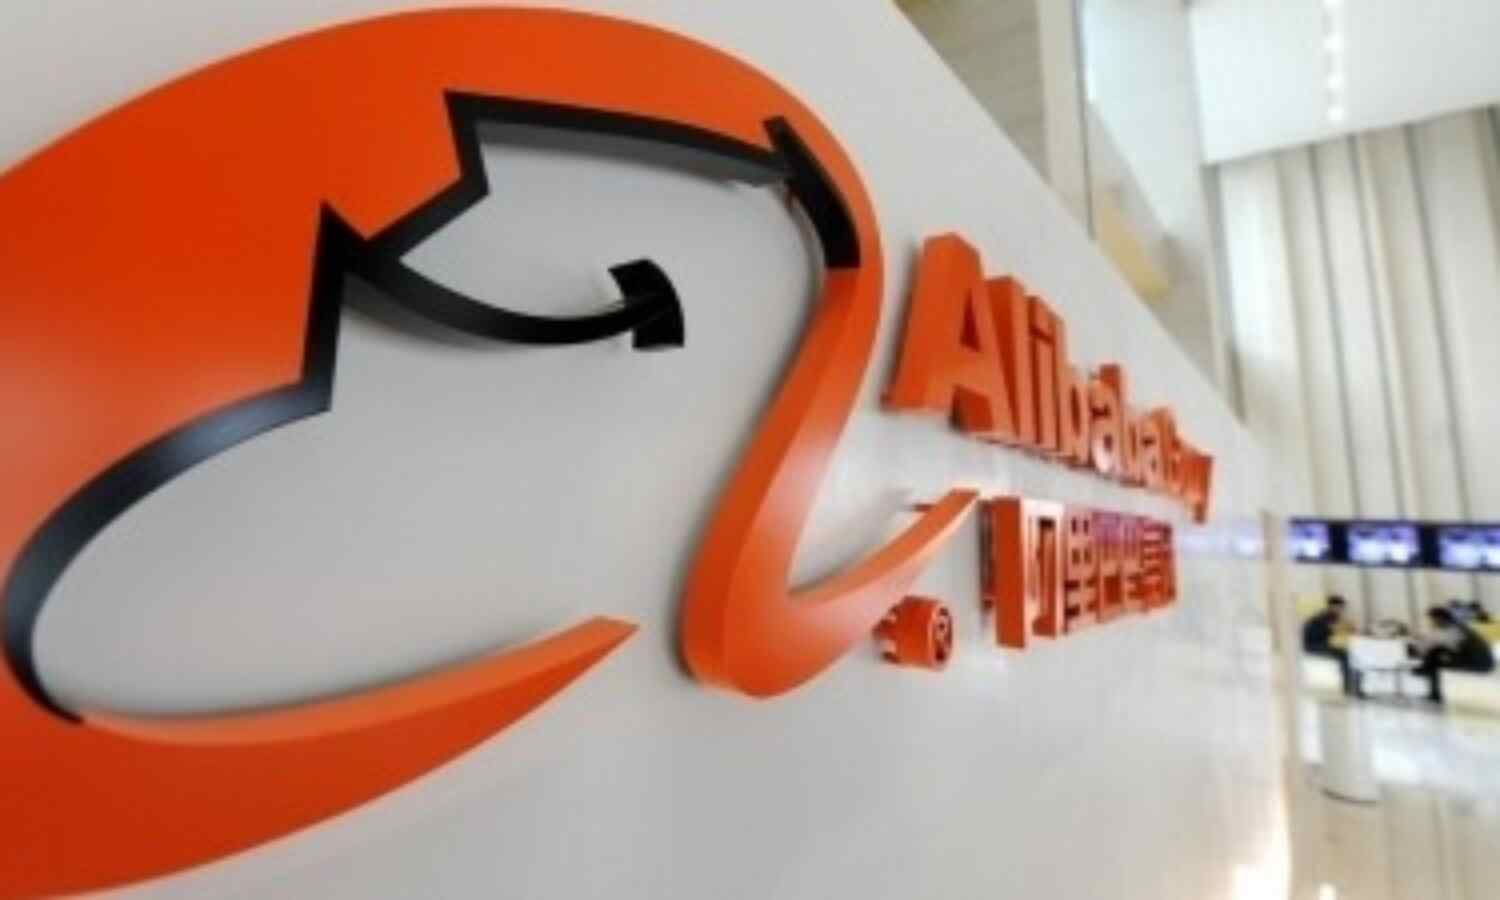 Alibaba to split into 6 business units, pursue IPOs